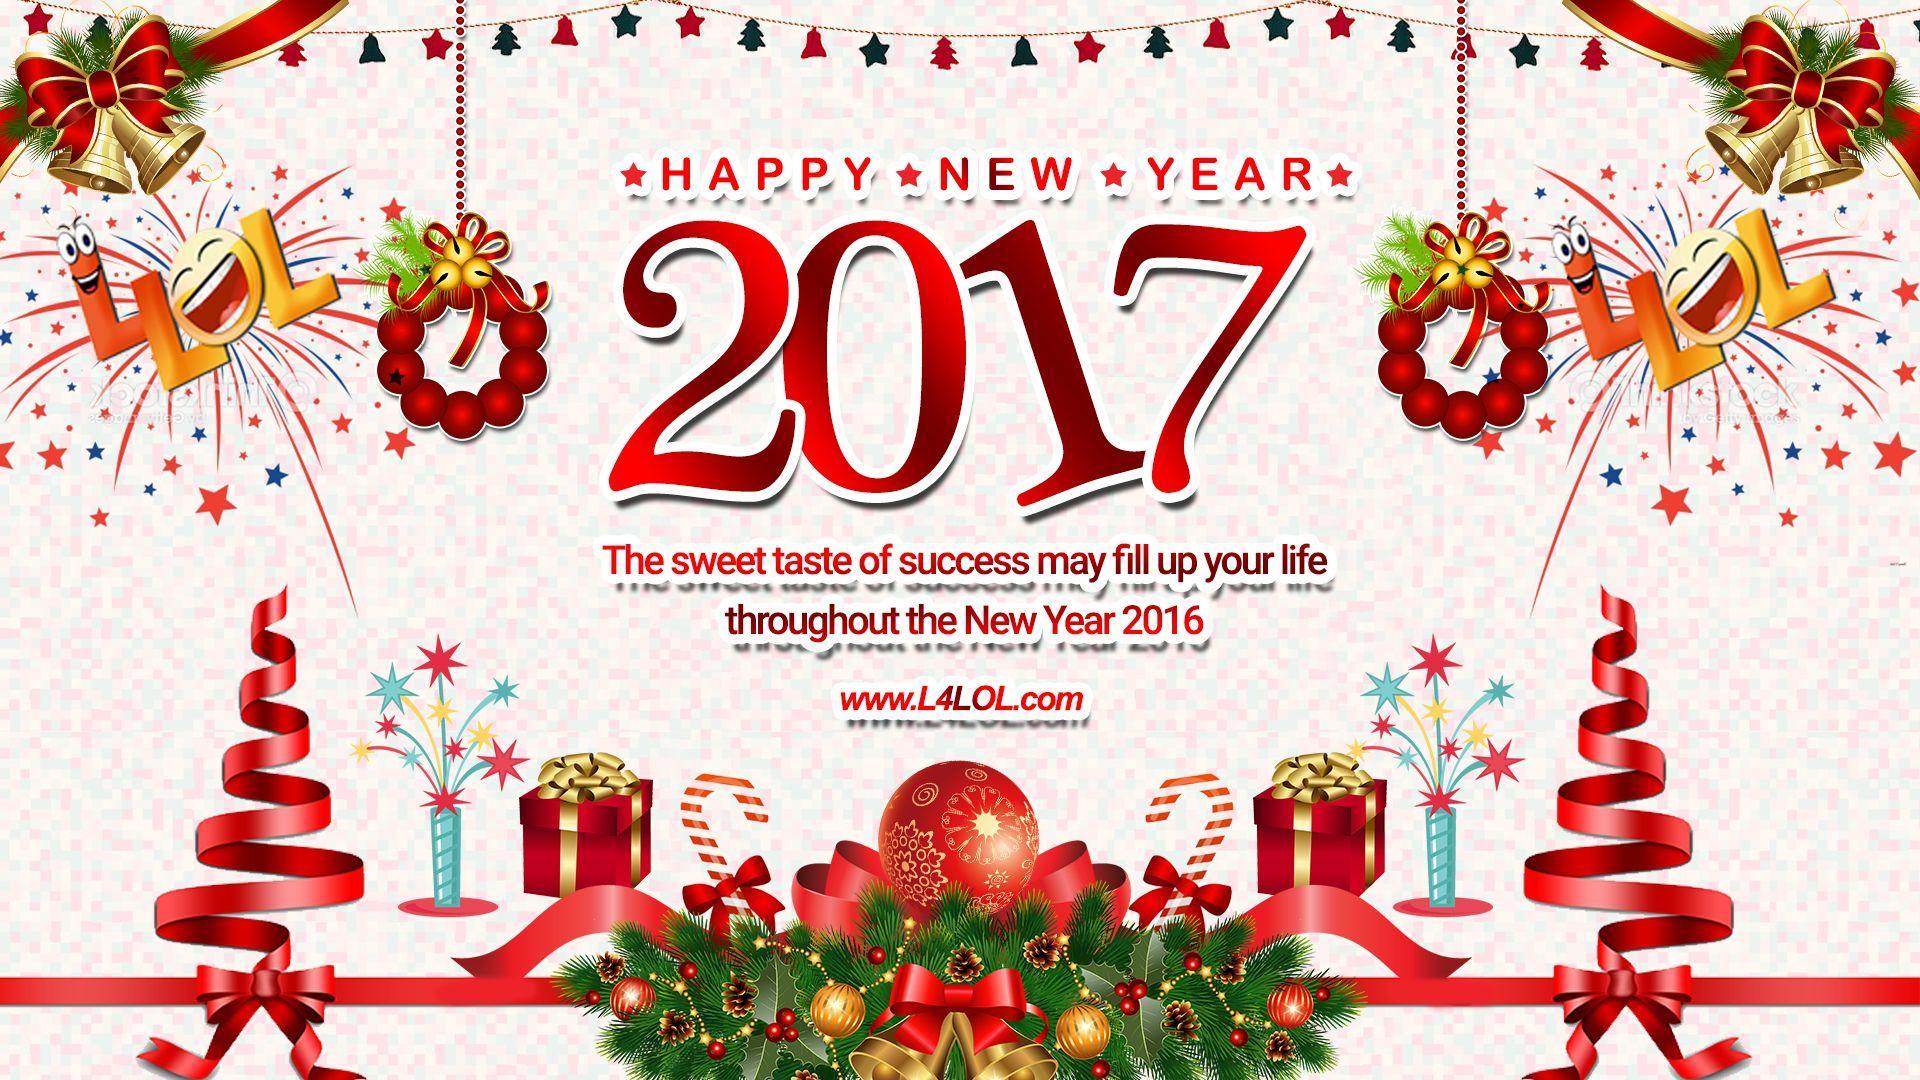 New Year HD wallpaper and Image 2017